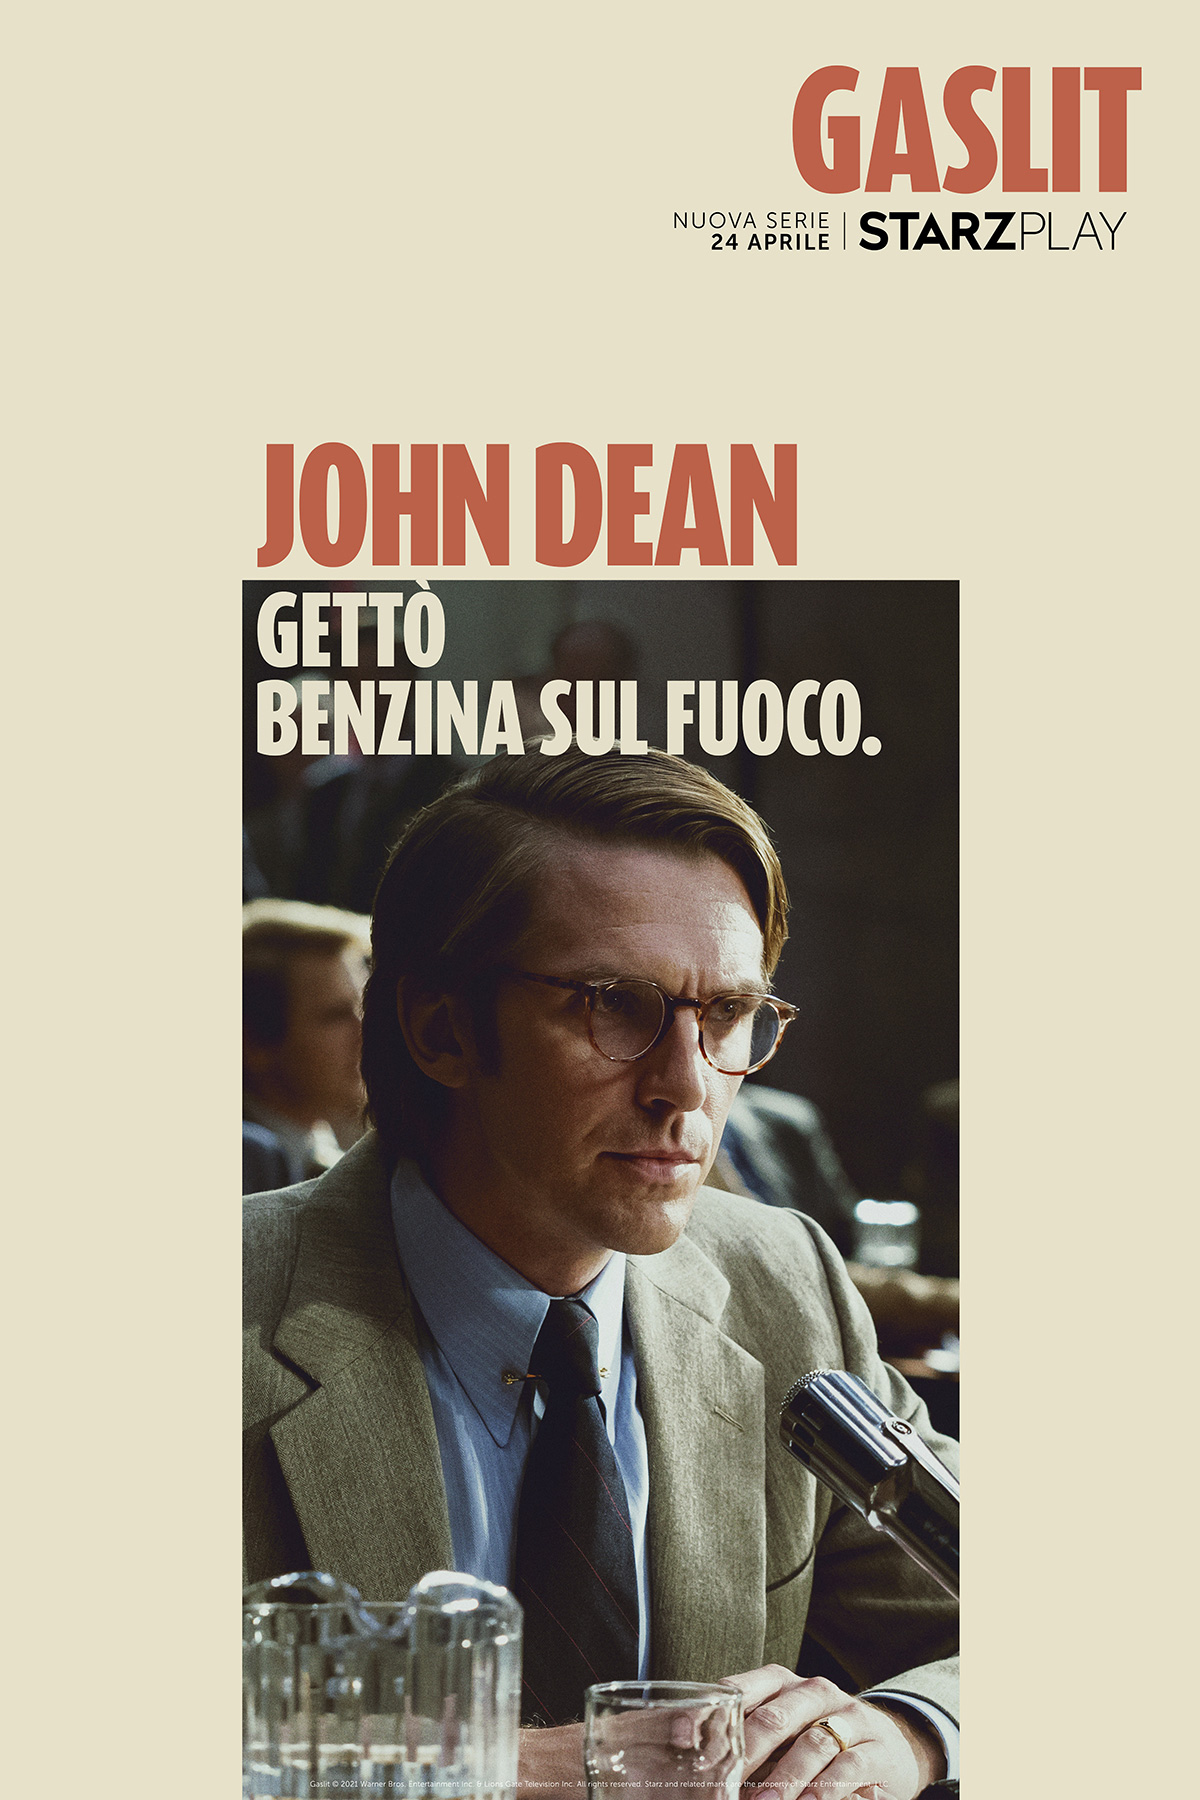 Character Poster John Dean [credit: The Refinery Agency; Copyright 2021 Warner Bros. Entertainment Inc. and Lions Gate Television Inc. All rights reserved. Artwork Copyright Starz Entertainment, LLC.]